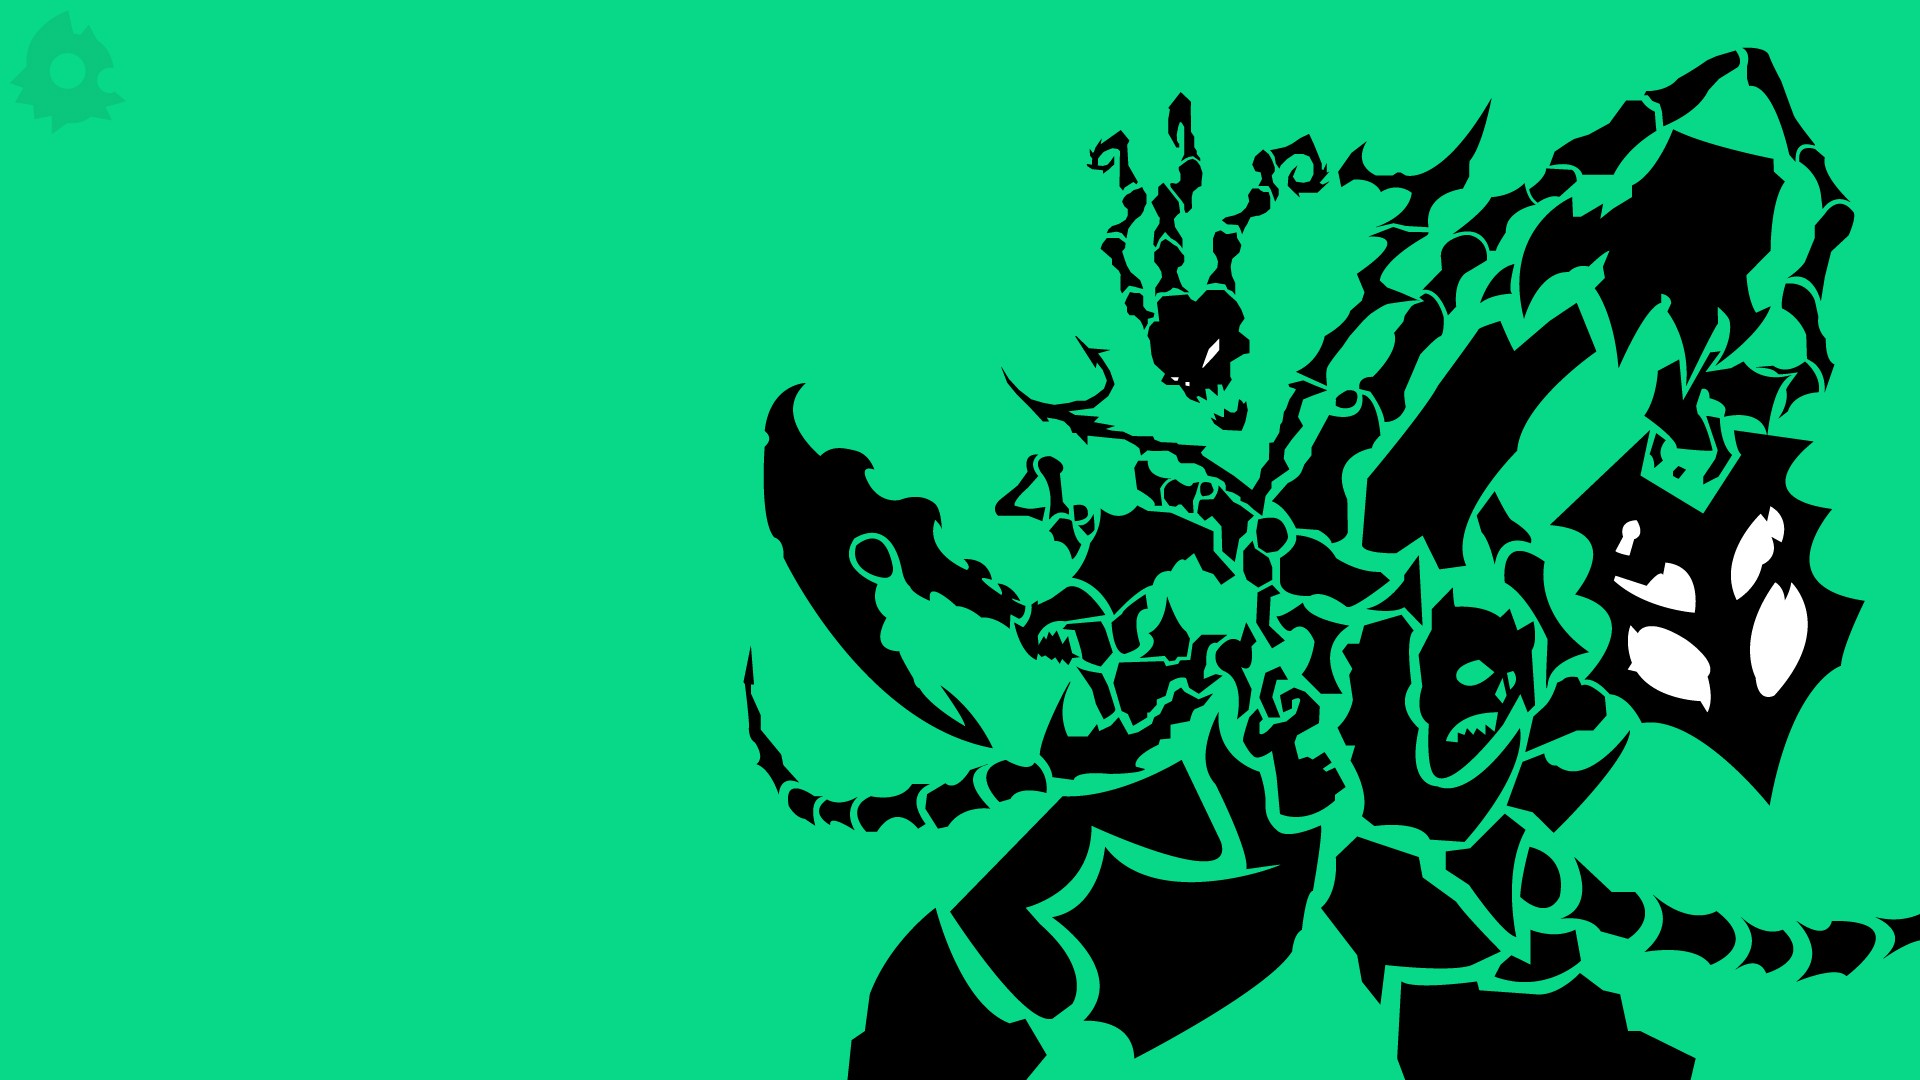 League Of Legends Thresh Green Background Simple Background Skull Pc Gaming Wallpaper Resolution 19x1080 Id 5516 Wallha Com